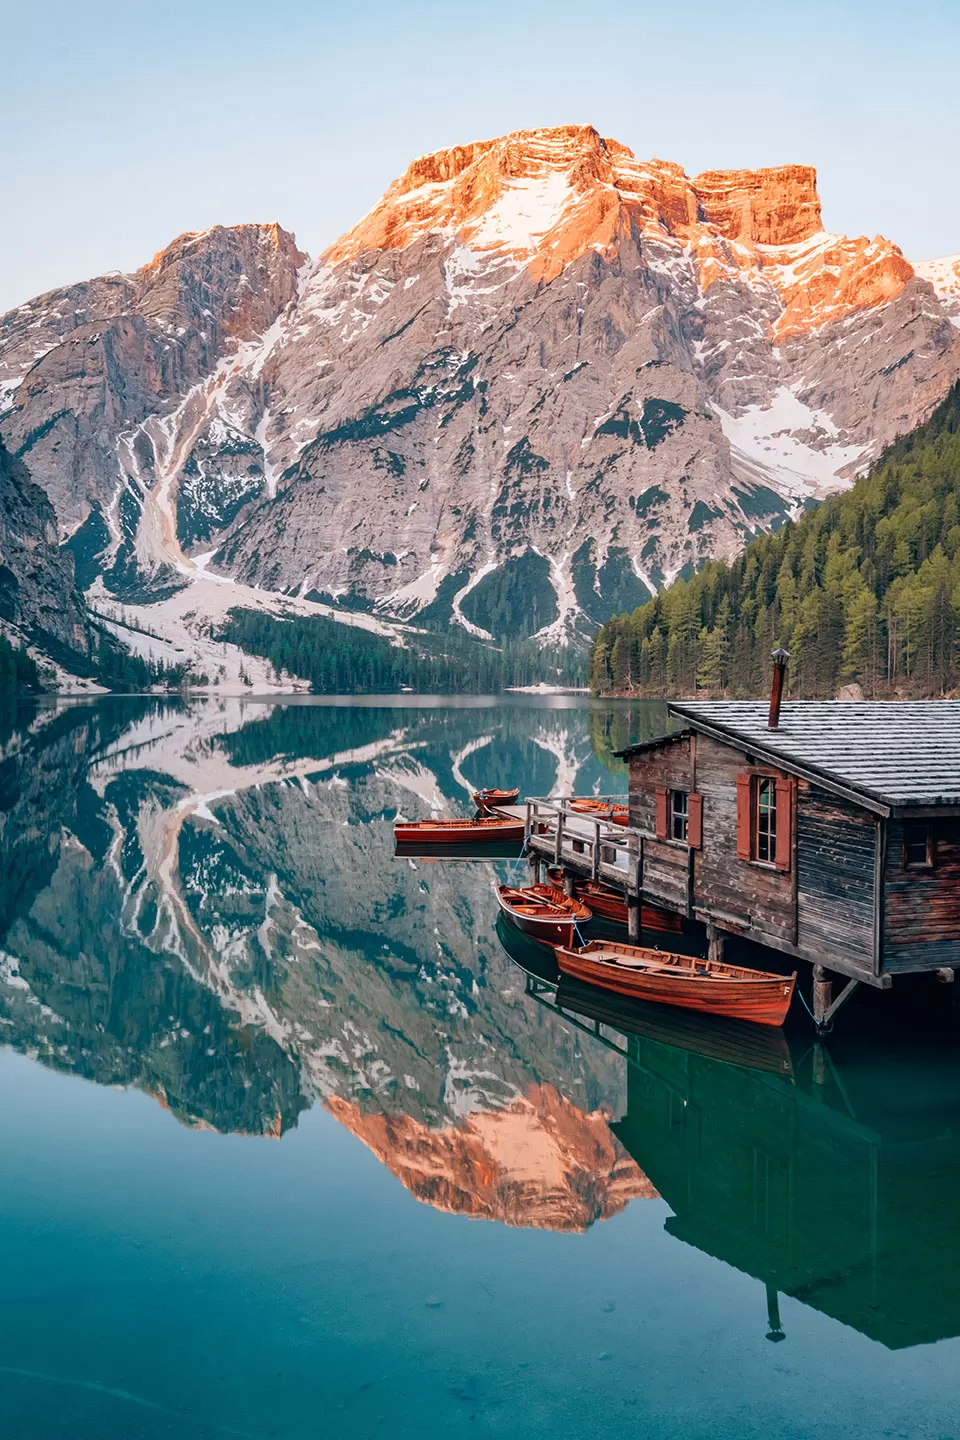 Best things to do in Trento Italy - Visit the Dolomites - Lake di Braies